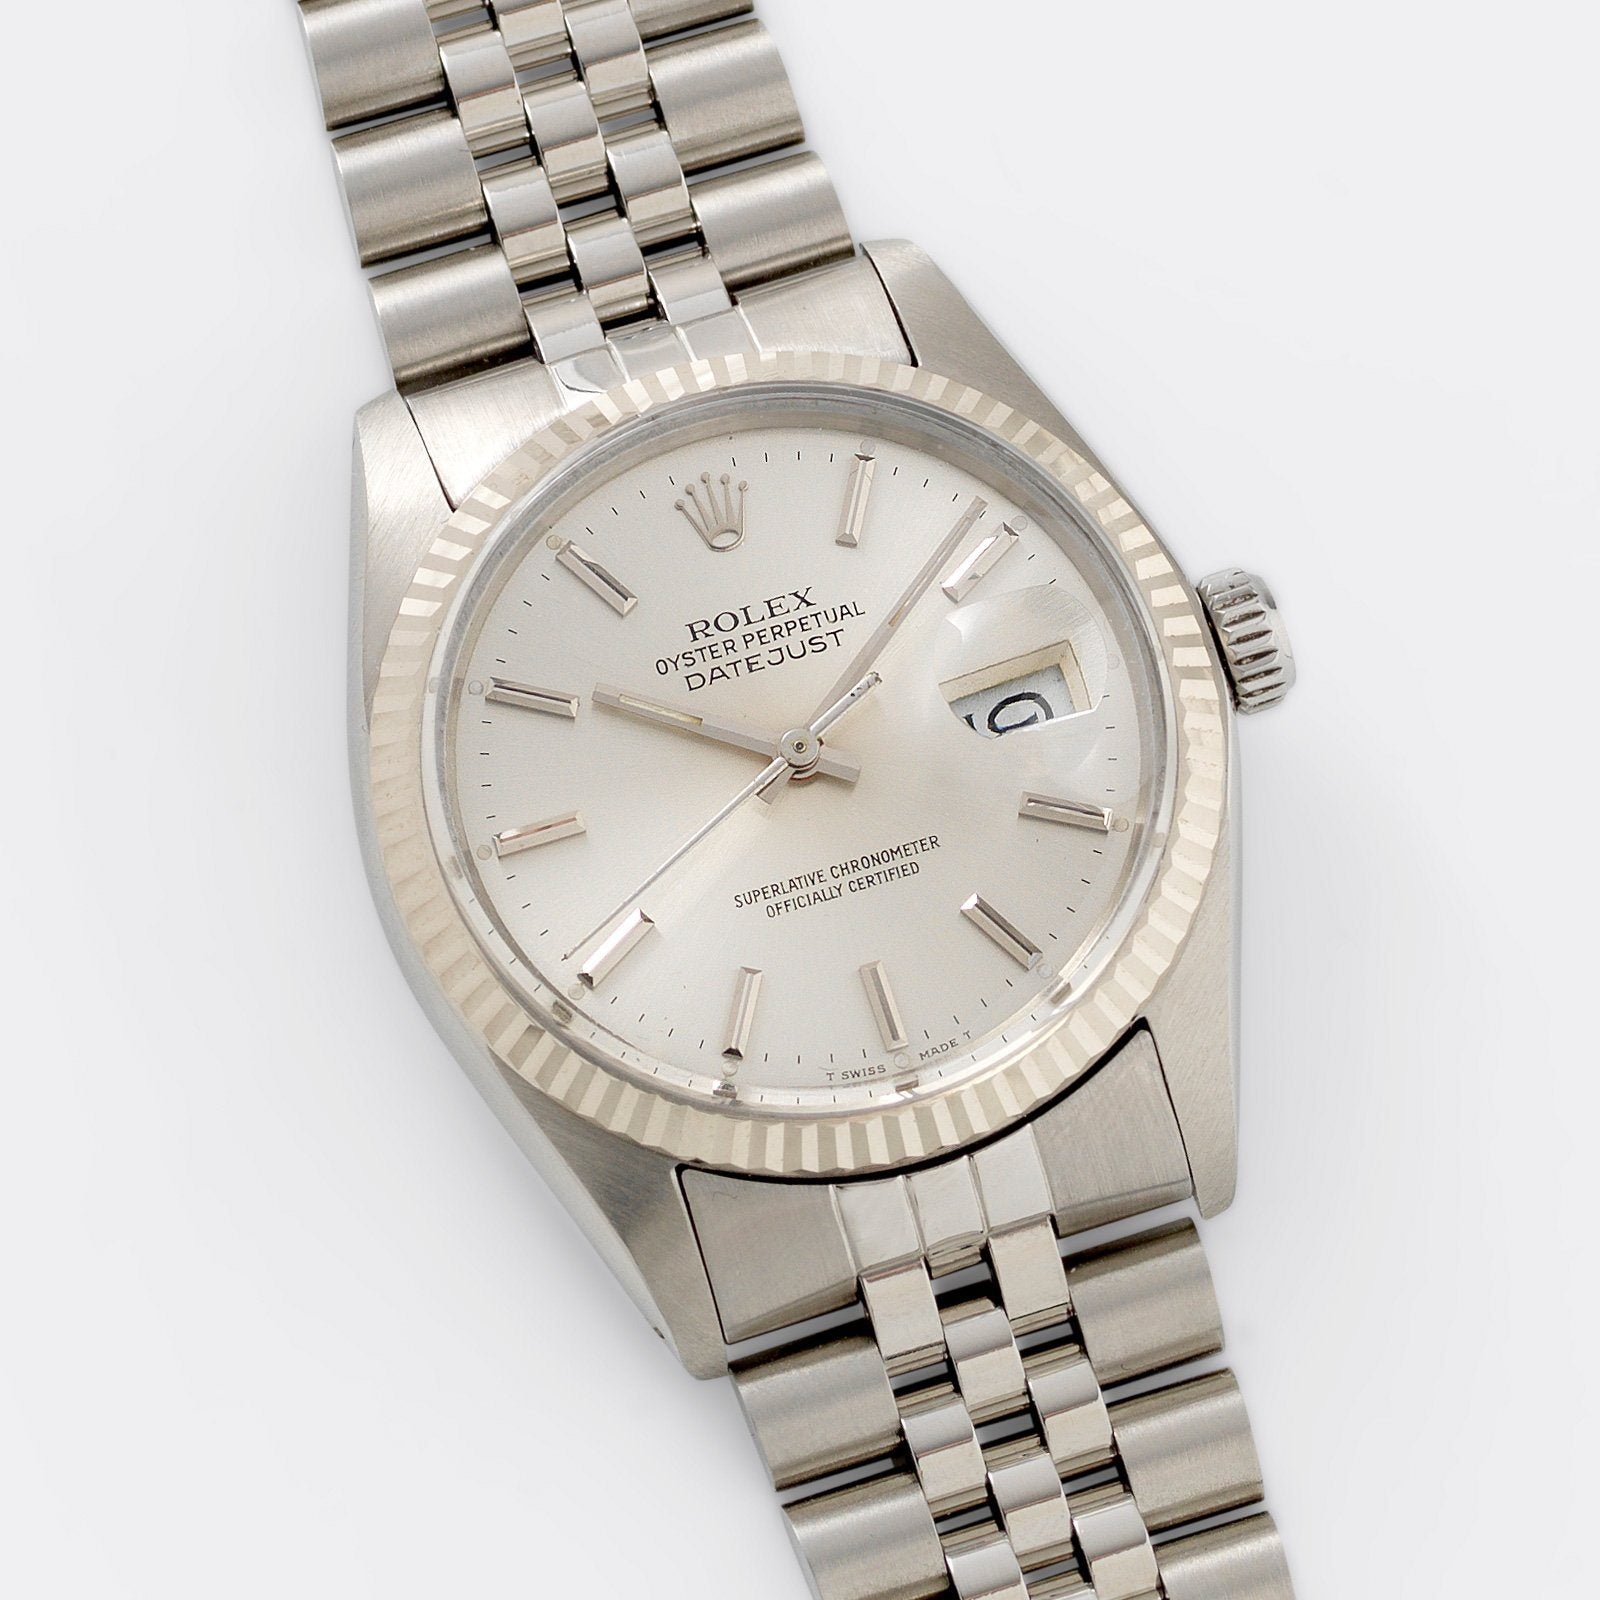 Rolex Datejust Reference 16014 Silver Dial Punched Papers